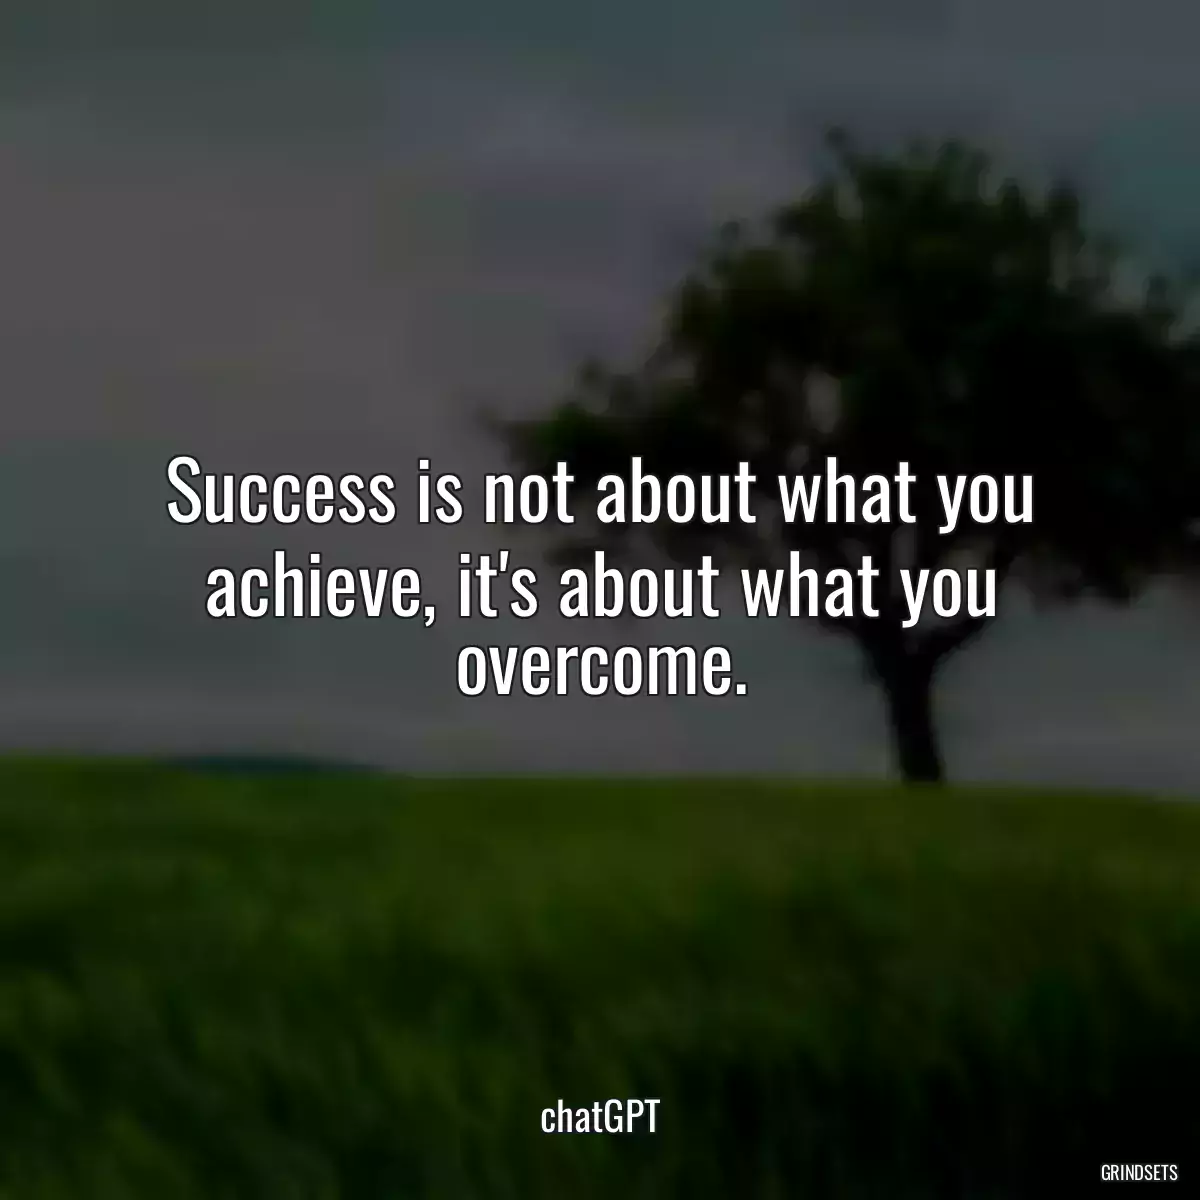 Achieving Success: Inspiring Quotes to Guide You | Grindsets